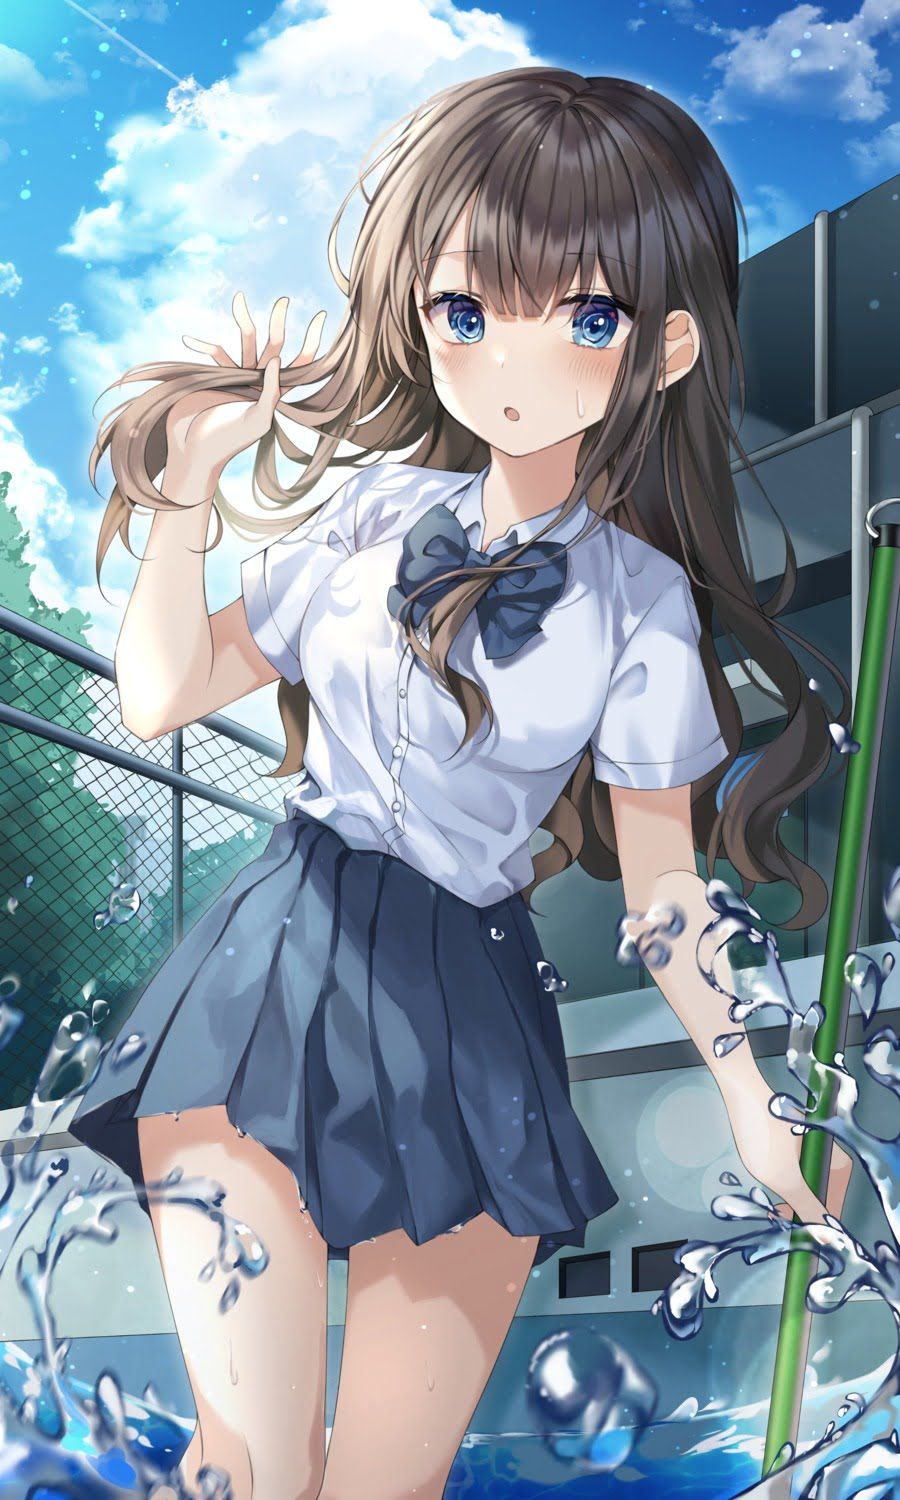 Sometimes this is good! Thursday morning starting with a refreshing and cute uniform beautiful girl moe ~ 11